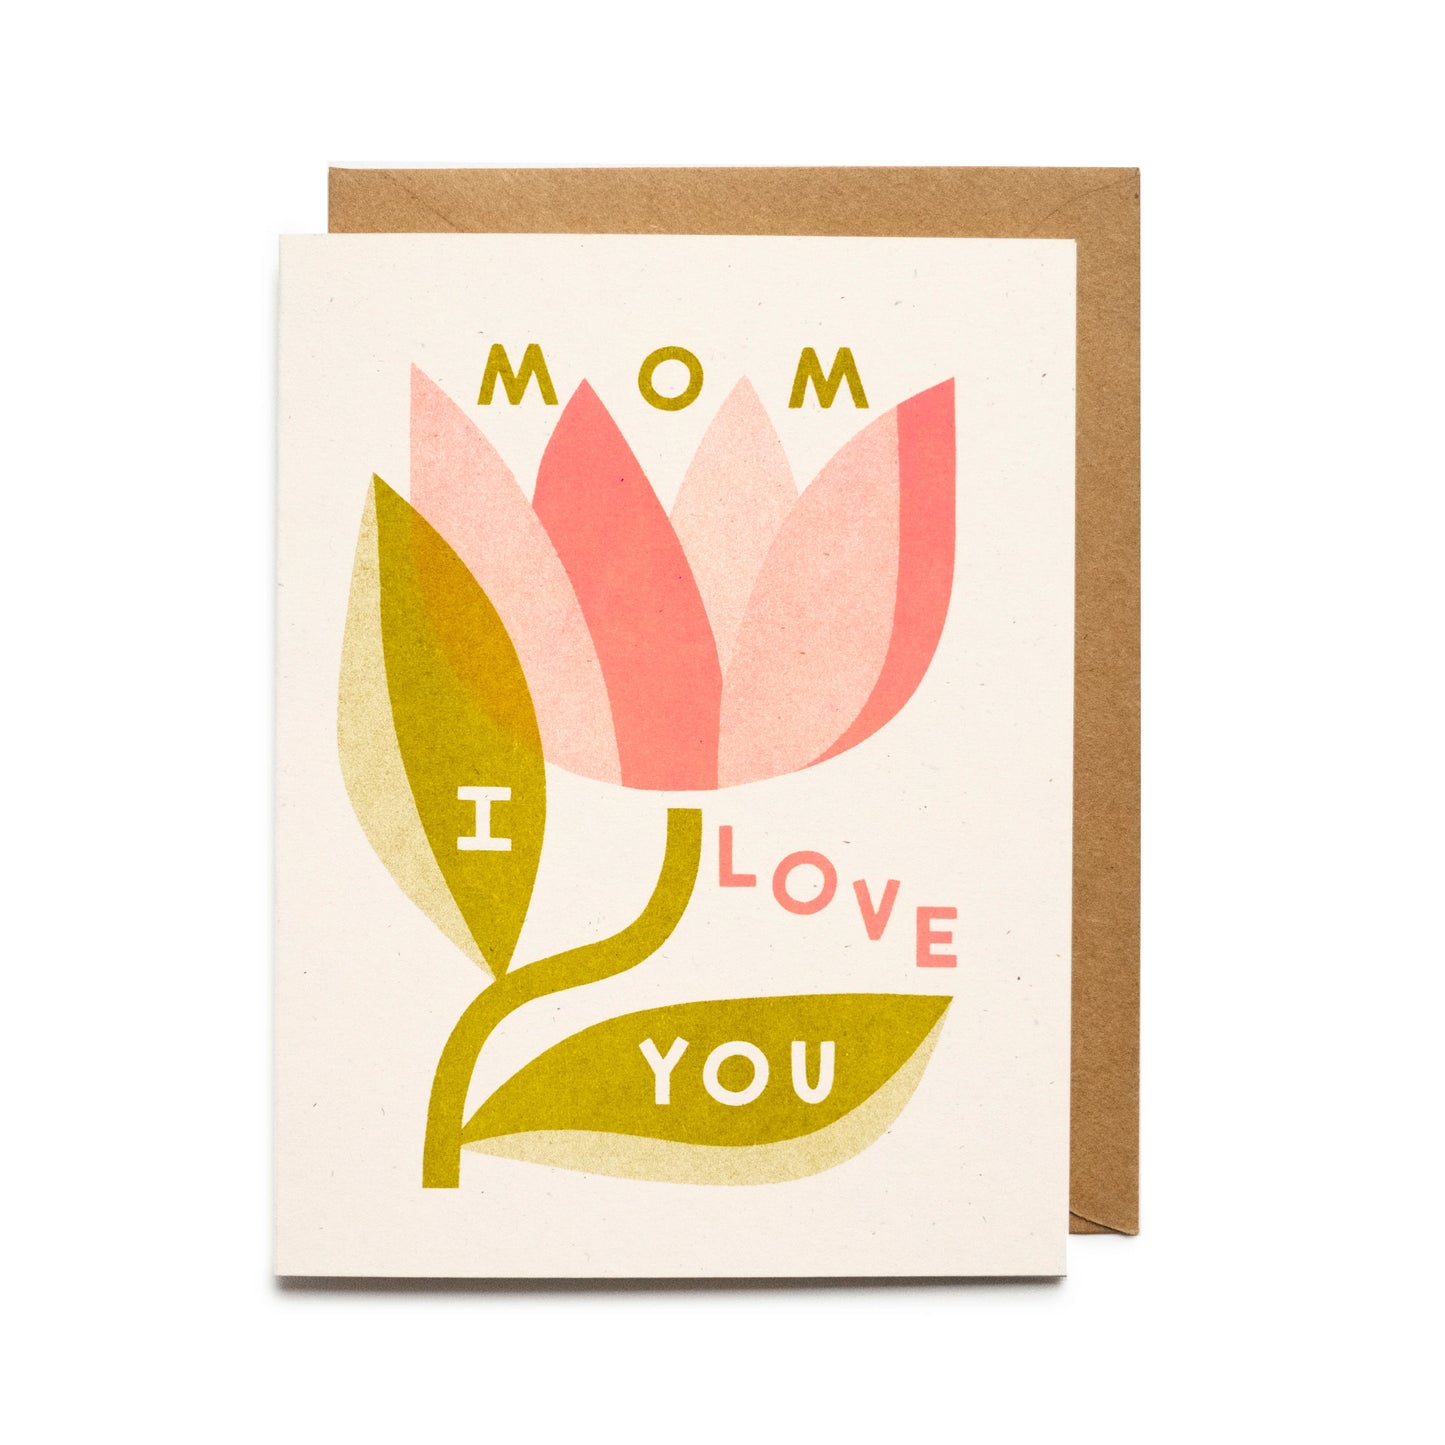 "Mom I Love You” Card by Worthwhile Paper